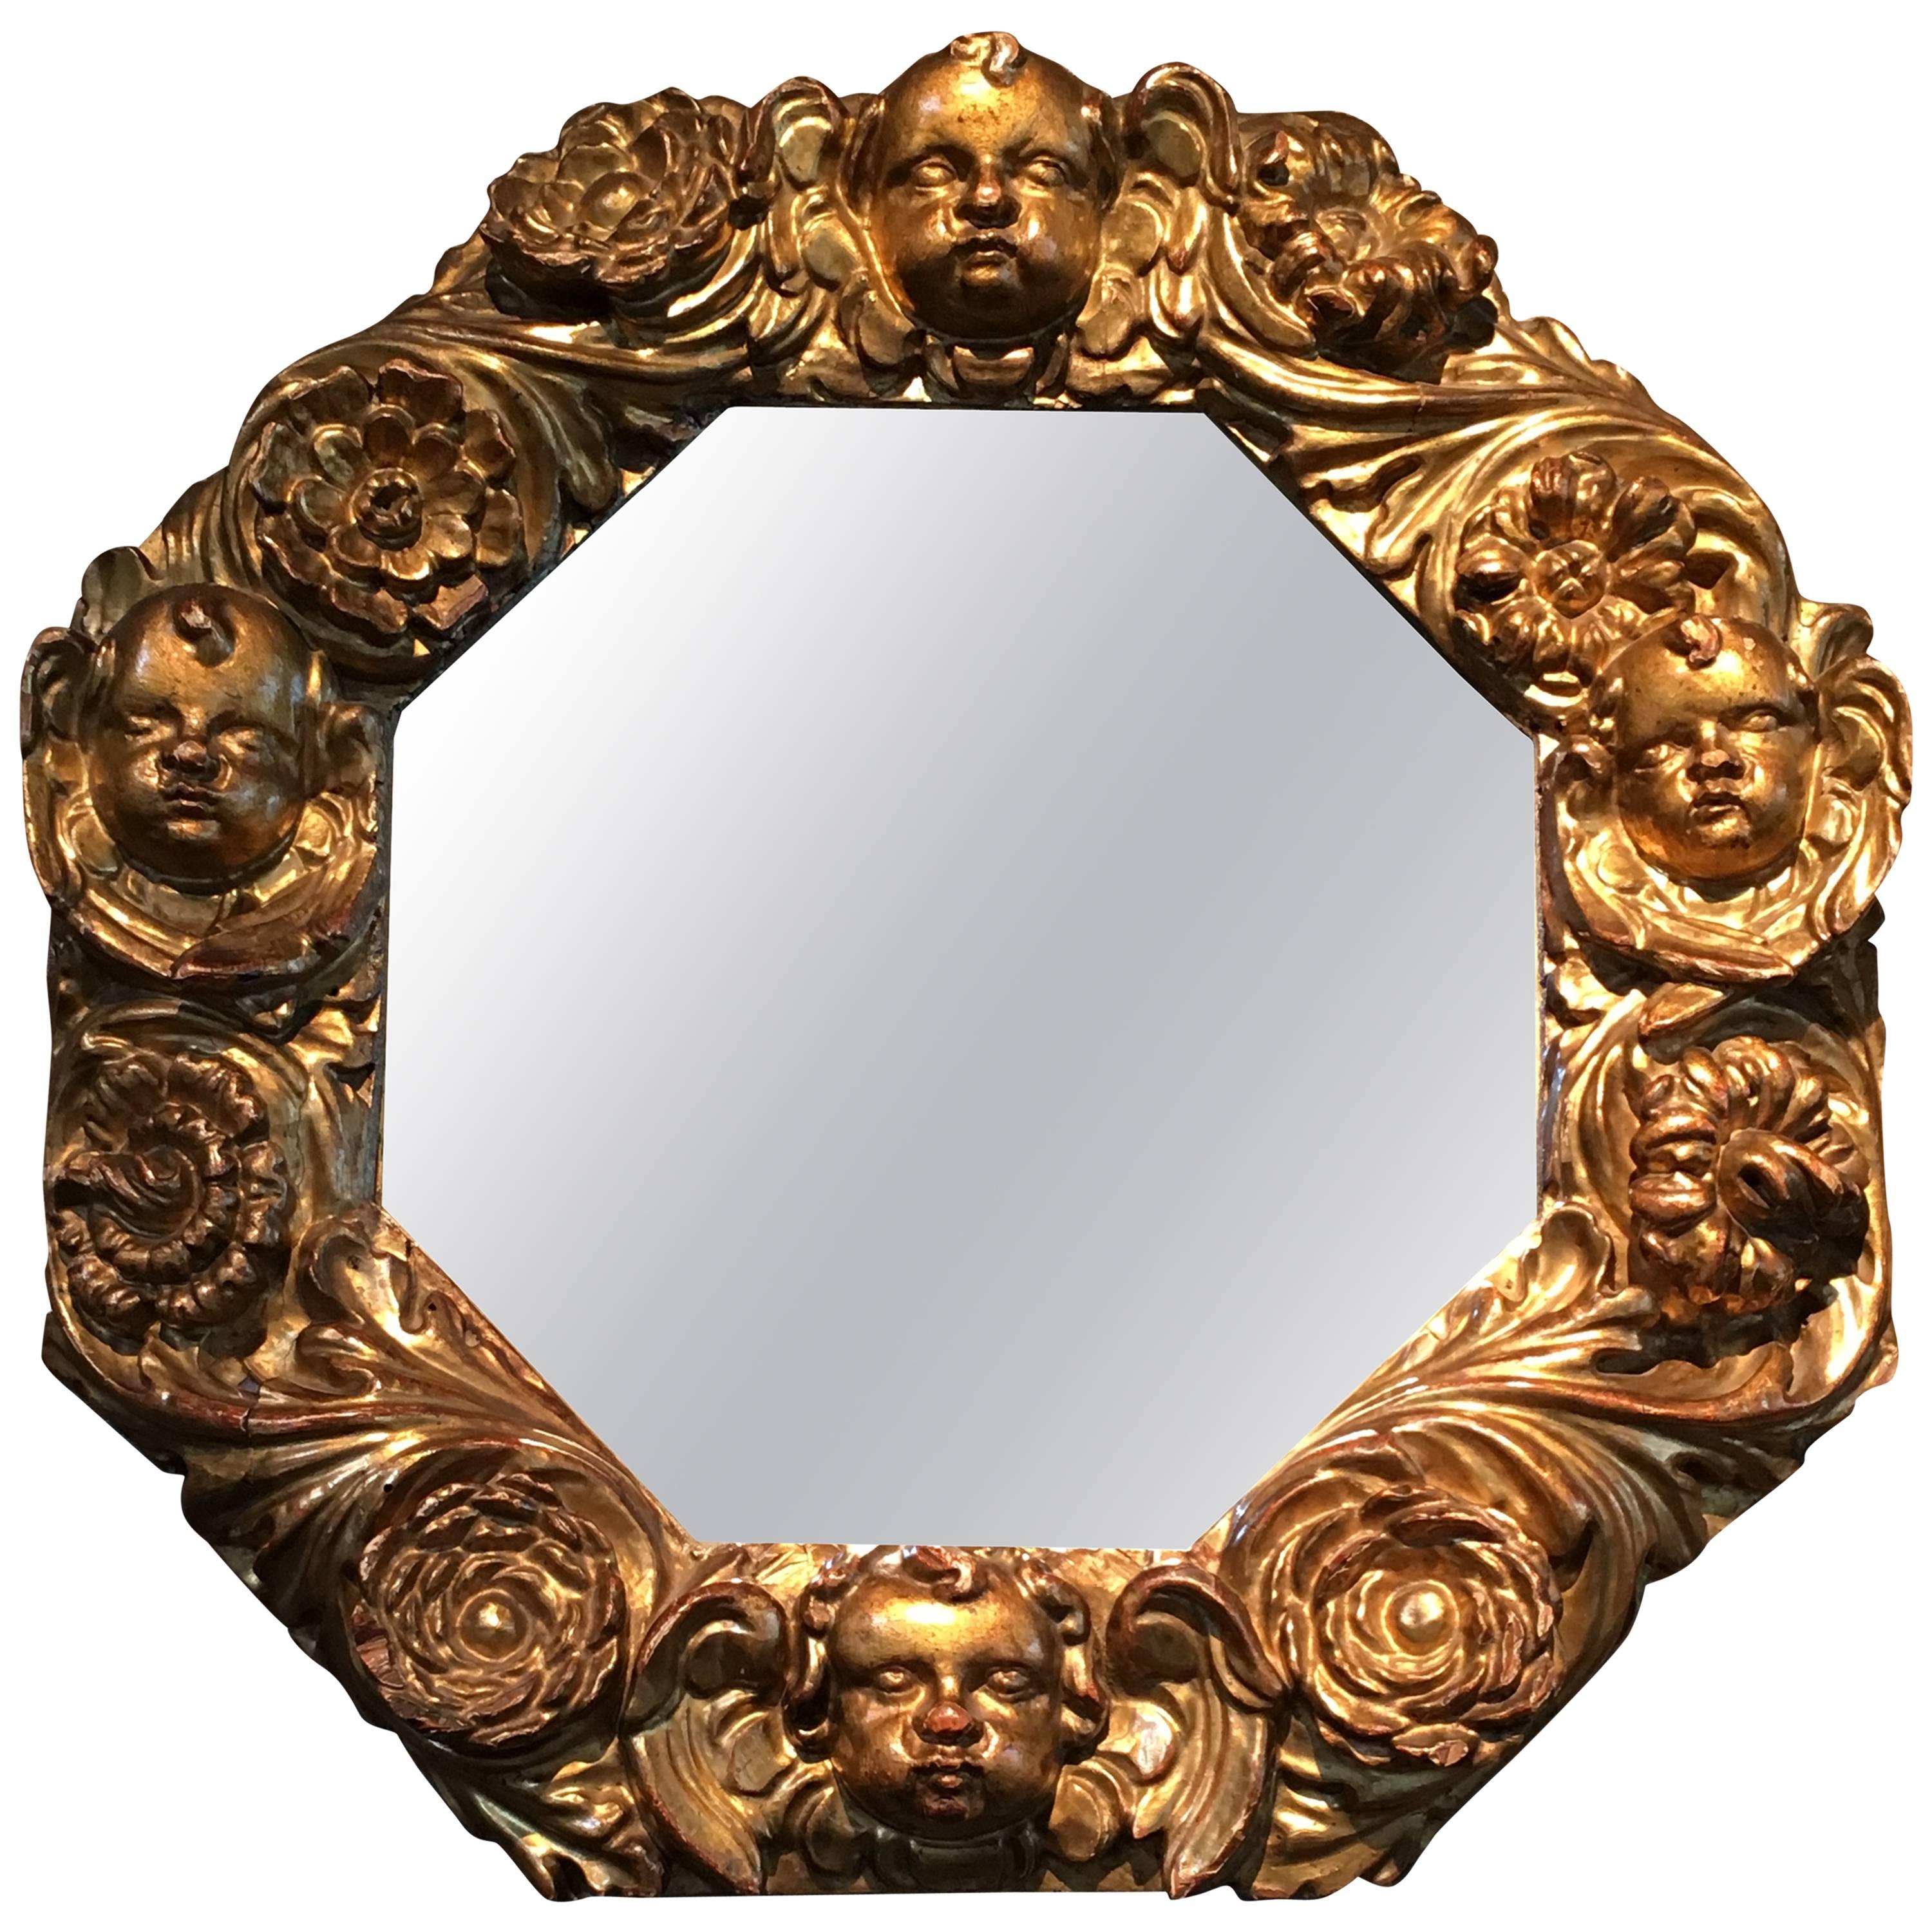 Giltwood Octagonal Mirror with Cherubs Heads, 17th Century For Sale